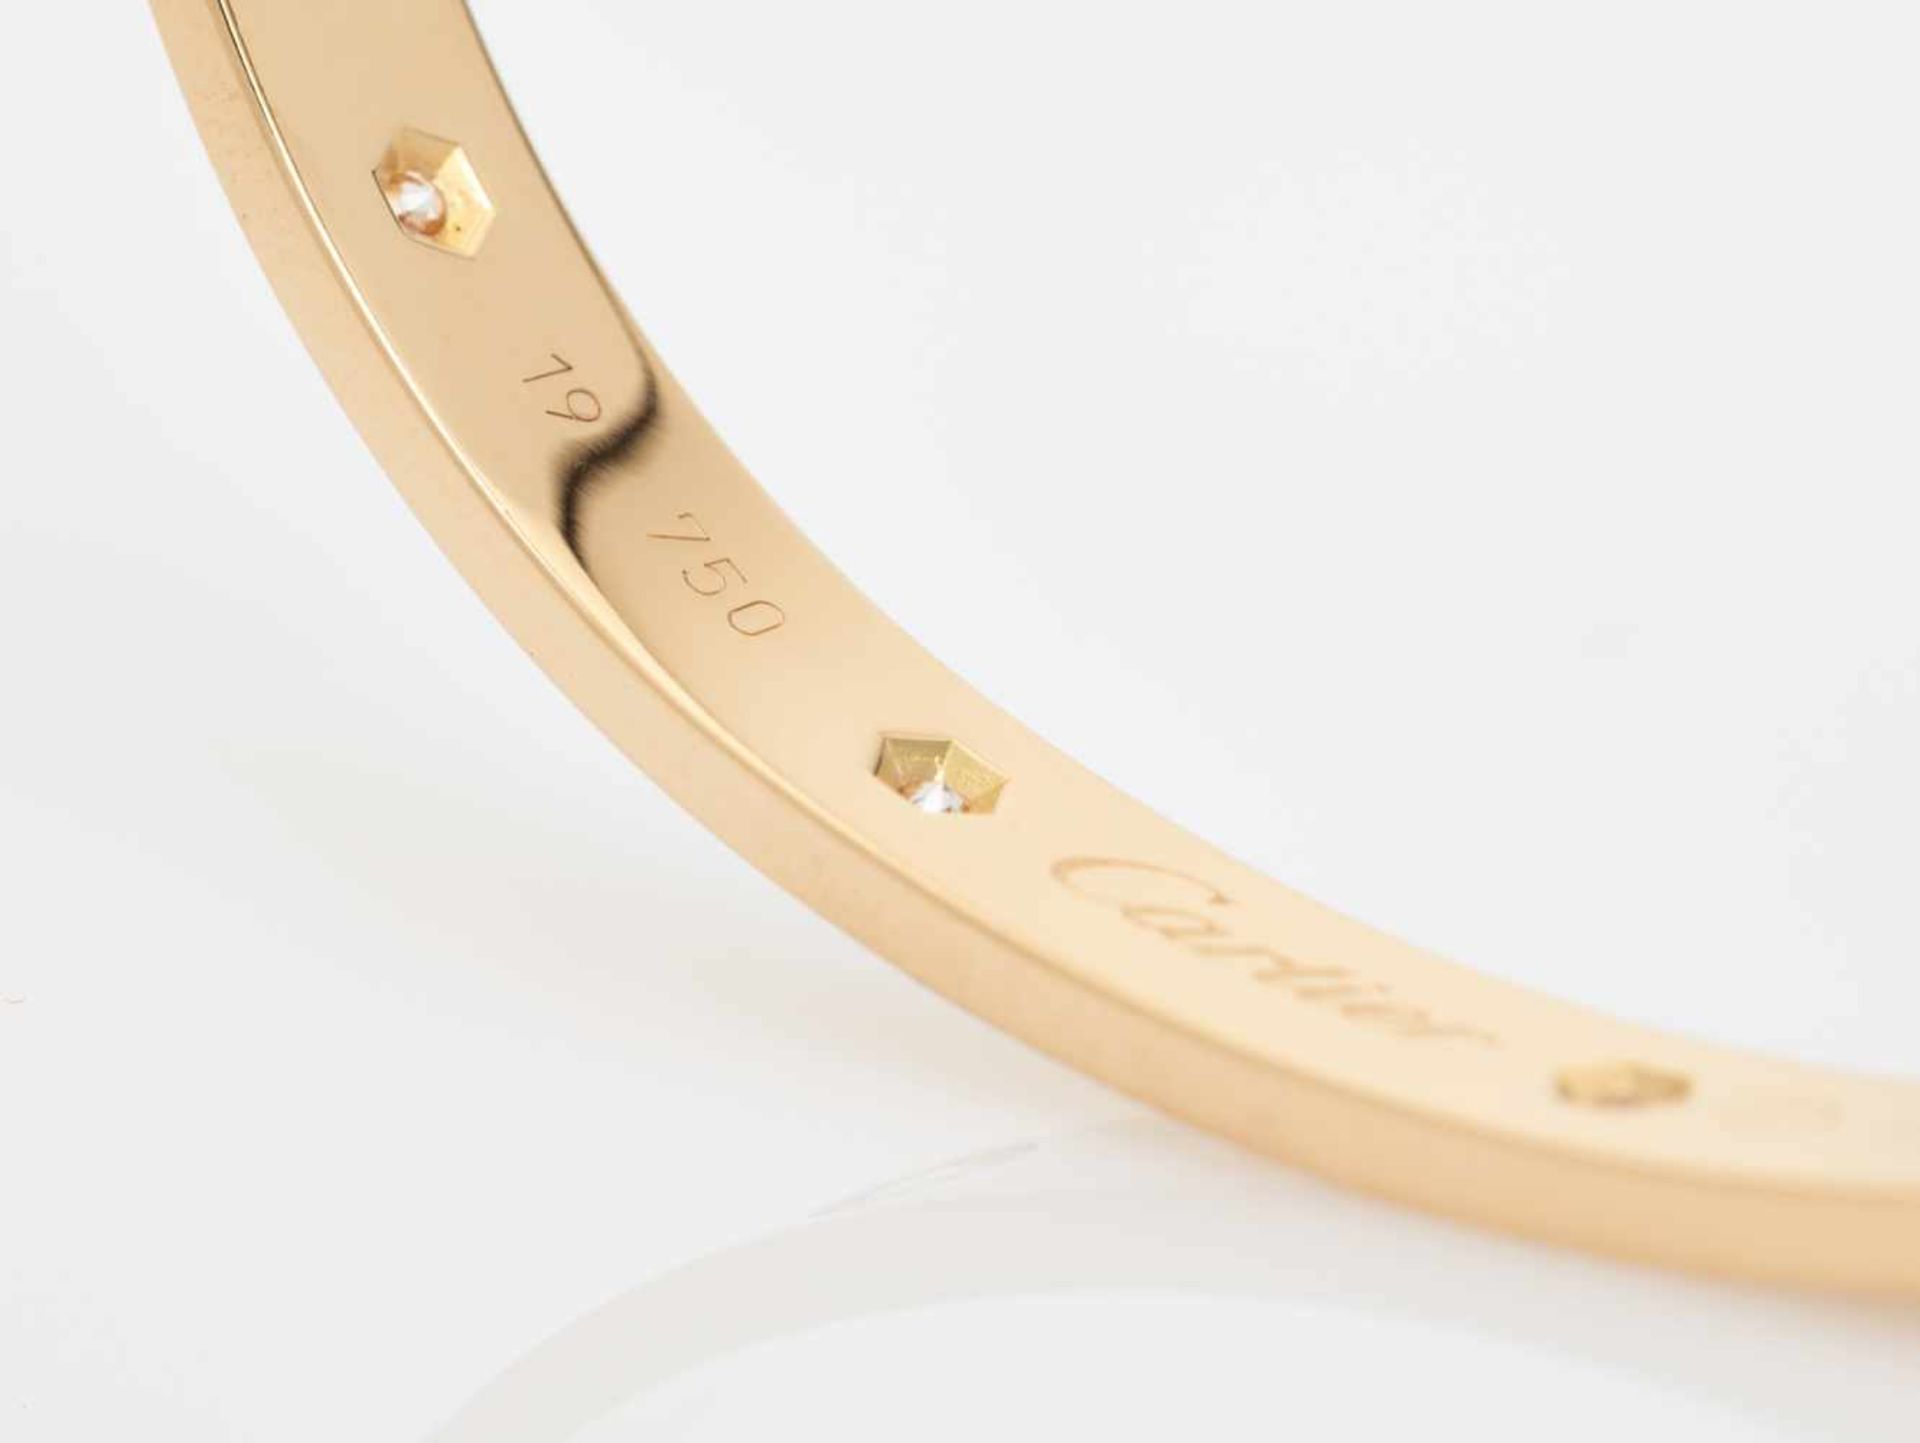 A CARTIER 18 CARAT GOLD ‘LOVE’ BANGLE WITH 1.2 CARATS OF DIAMONDSFrance2007, signed ‘Cartier’, - Image 7 of 9